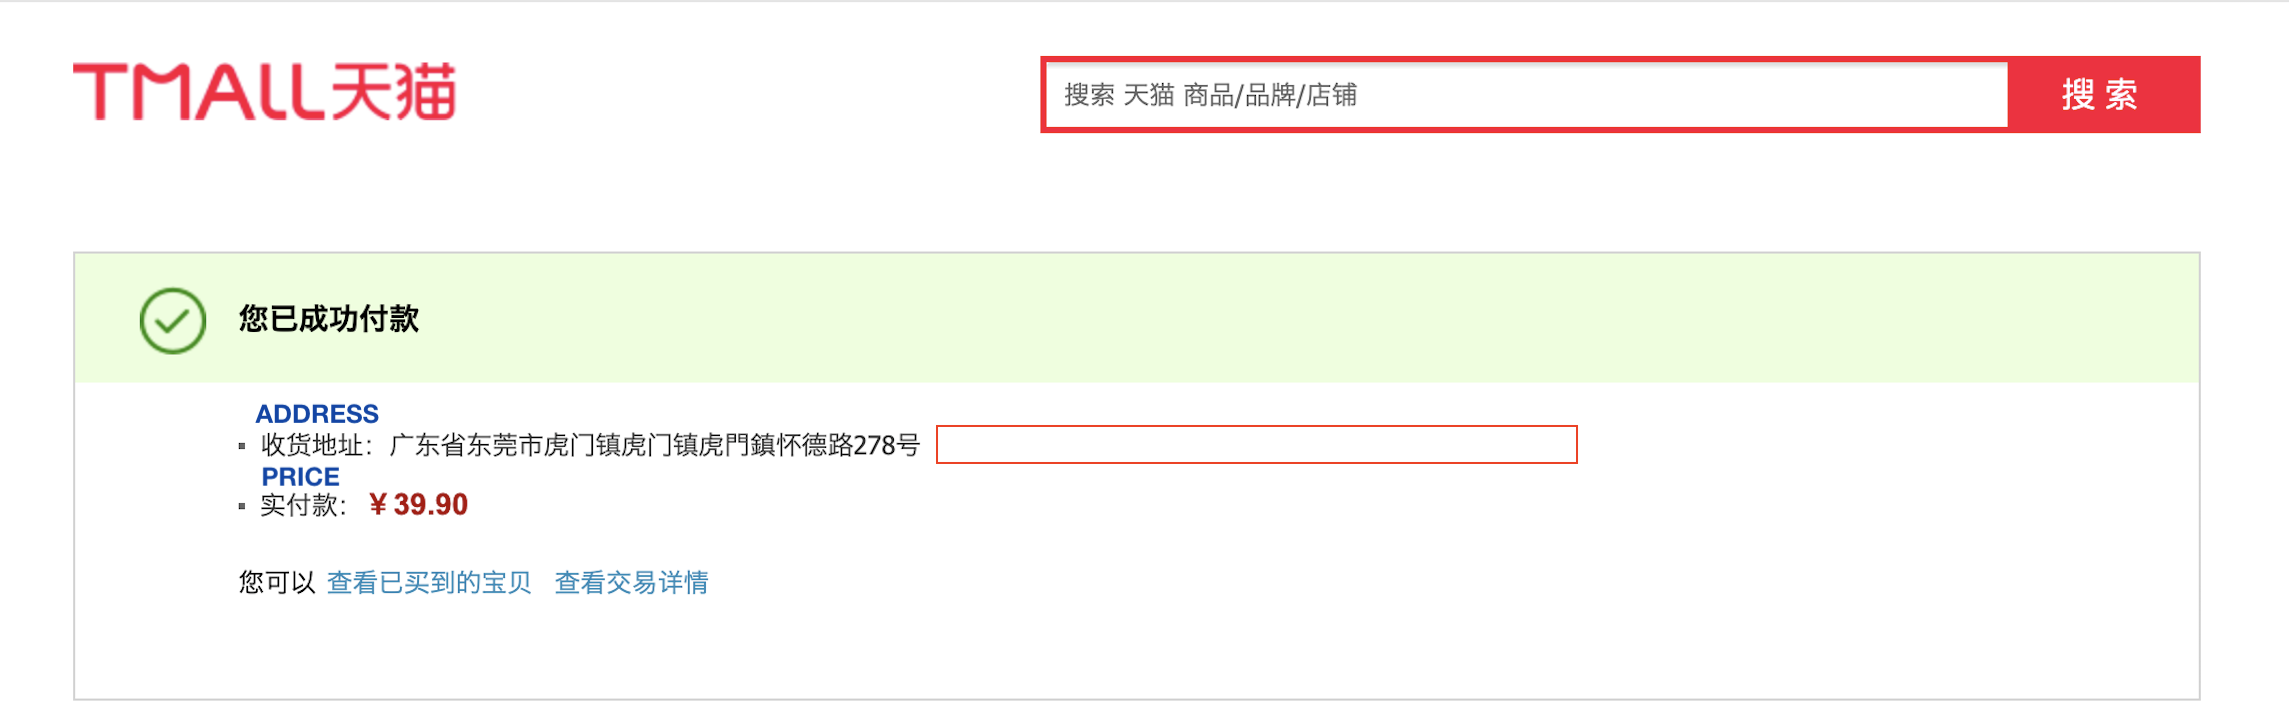 taobao guide step by step translated english shopping style lifestyle order confirmed